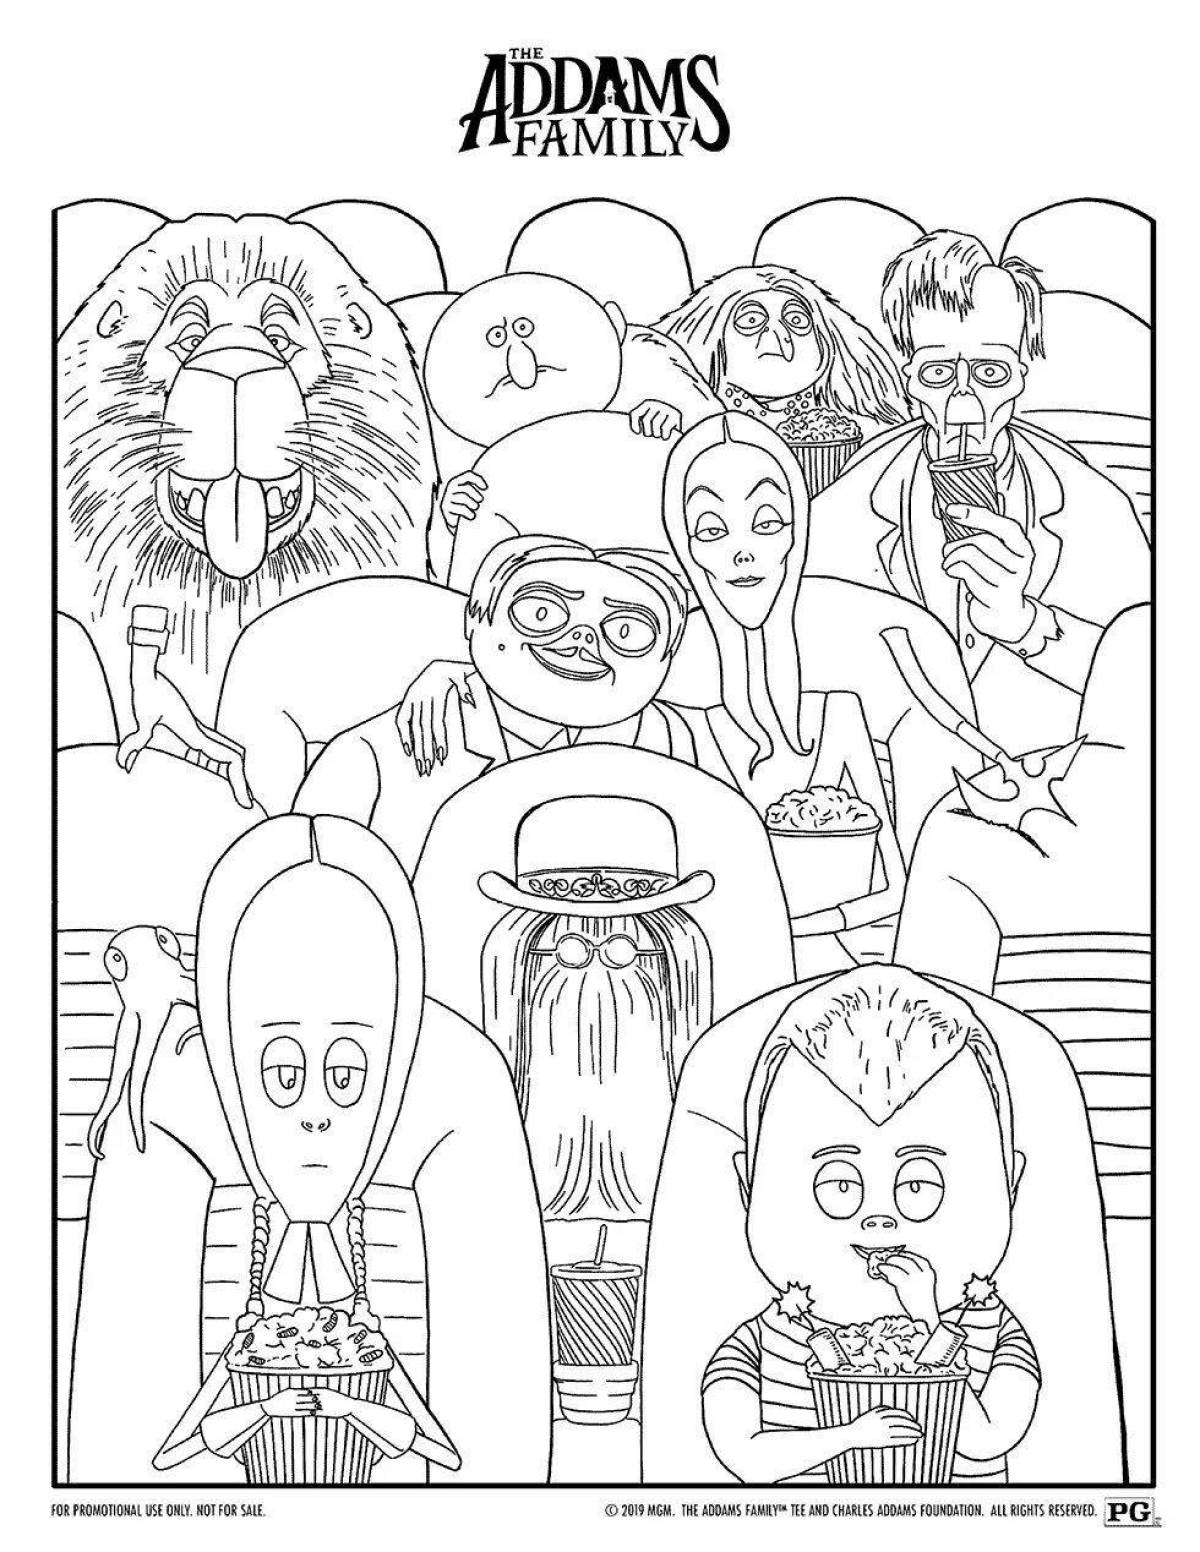 Addams environment attraction coloring page